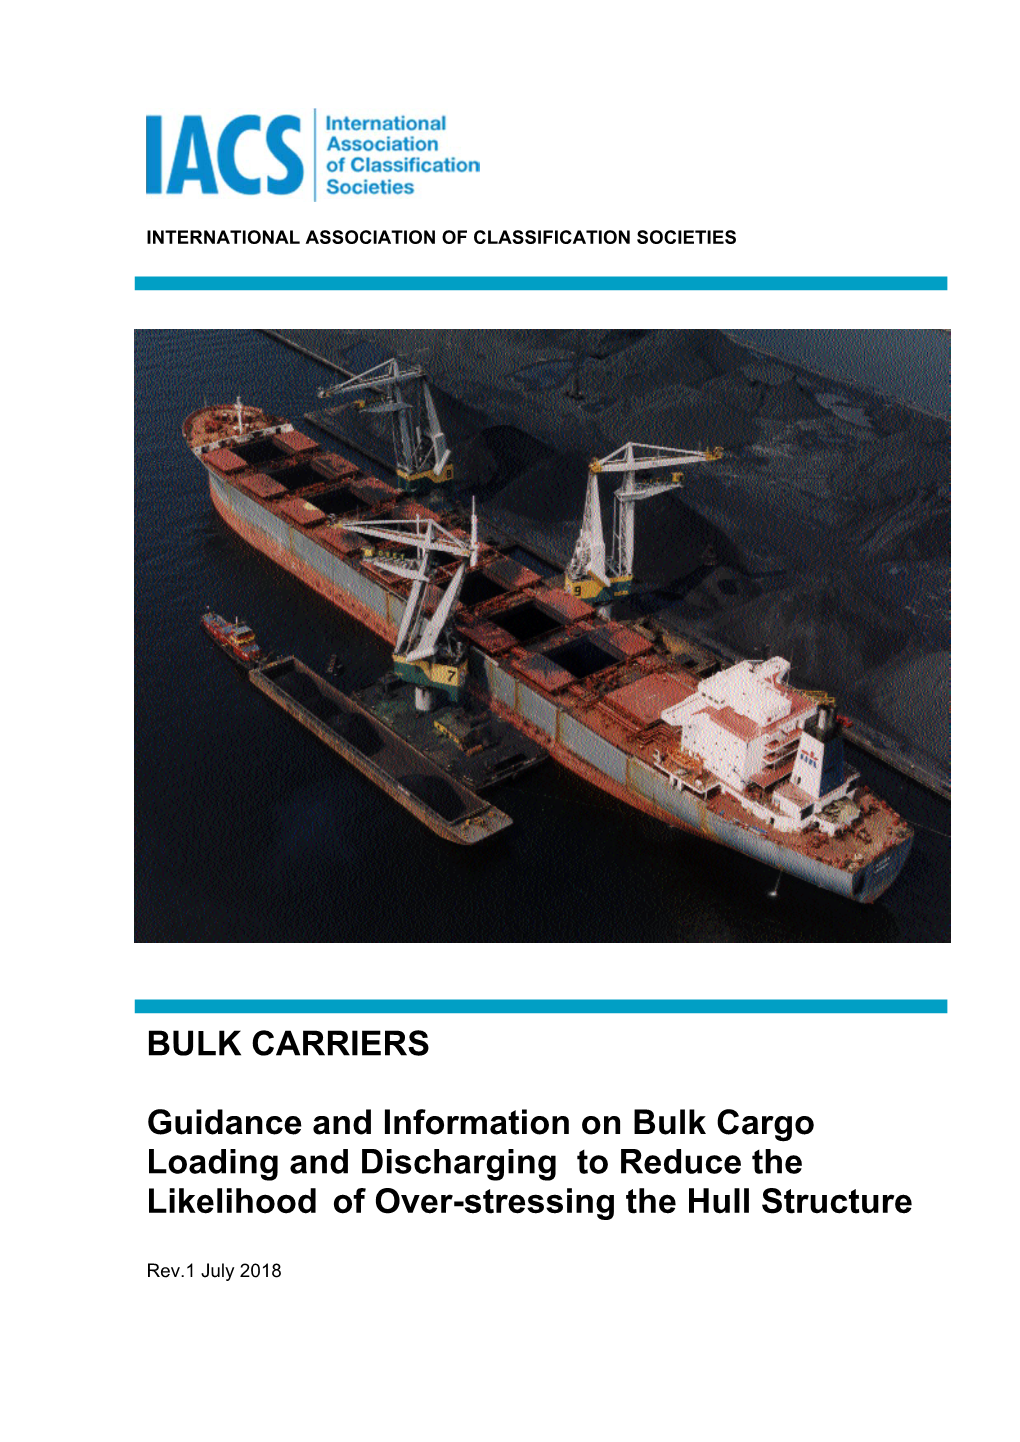 BULK CARRIERS Guidance and Information on Bulk Cargo Loading